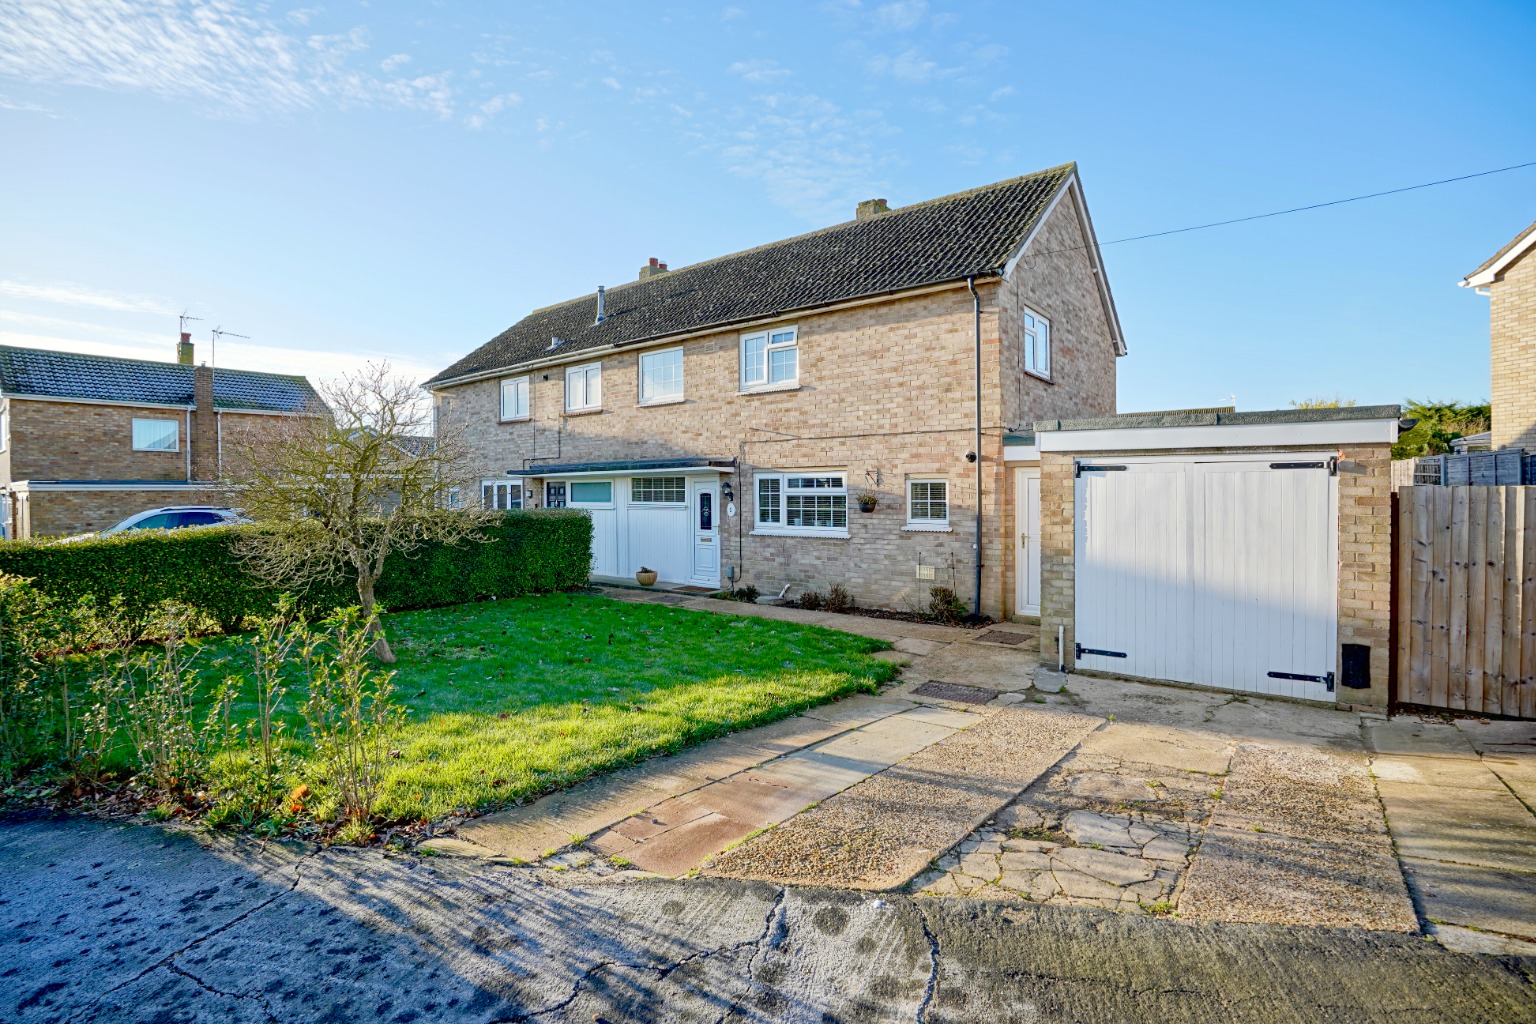 3 bed semi-detached house for sale in Pennington Road, Huntingdon  - Property Image 1